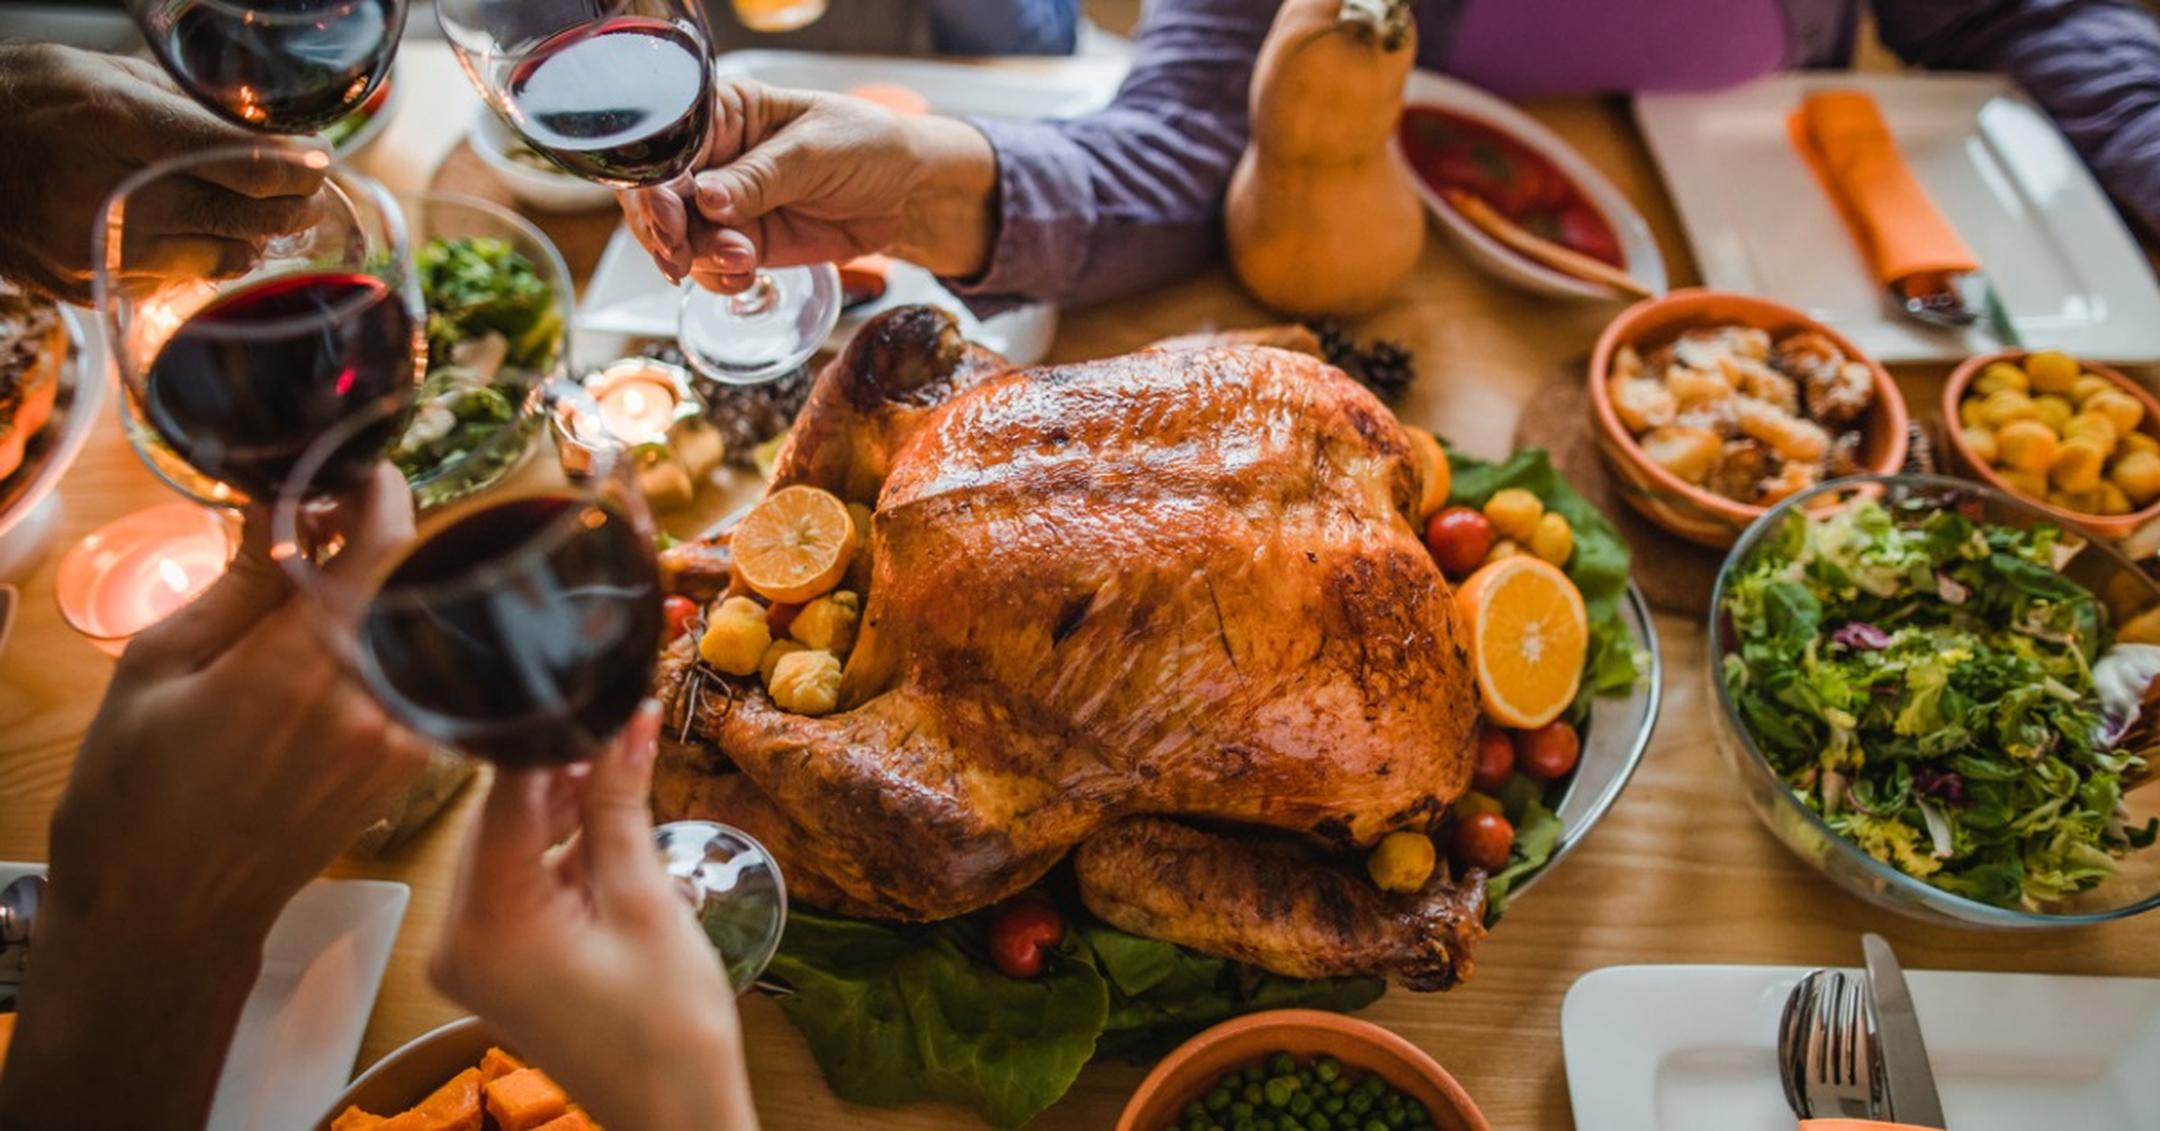 She revealed that her husband's mother just asked all of the guests who plan on attending her Christmas lunch to bring $21 per head in order to pay for the meal.